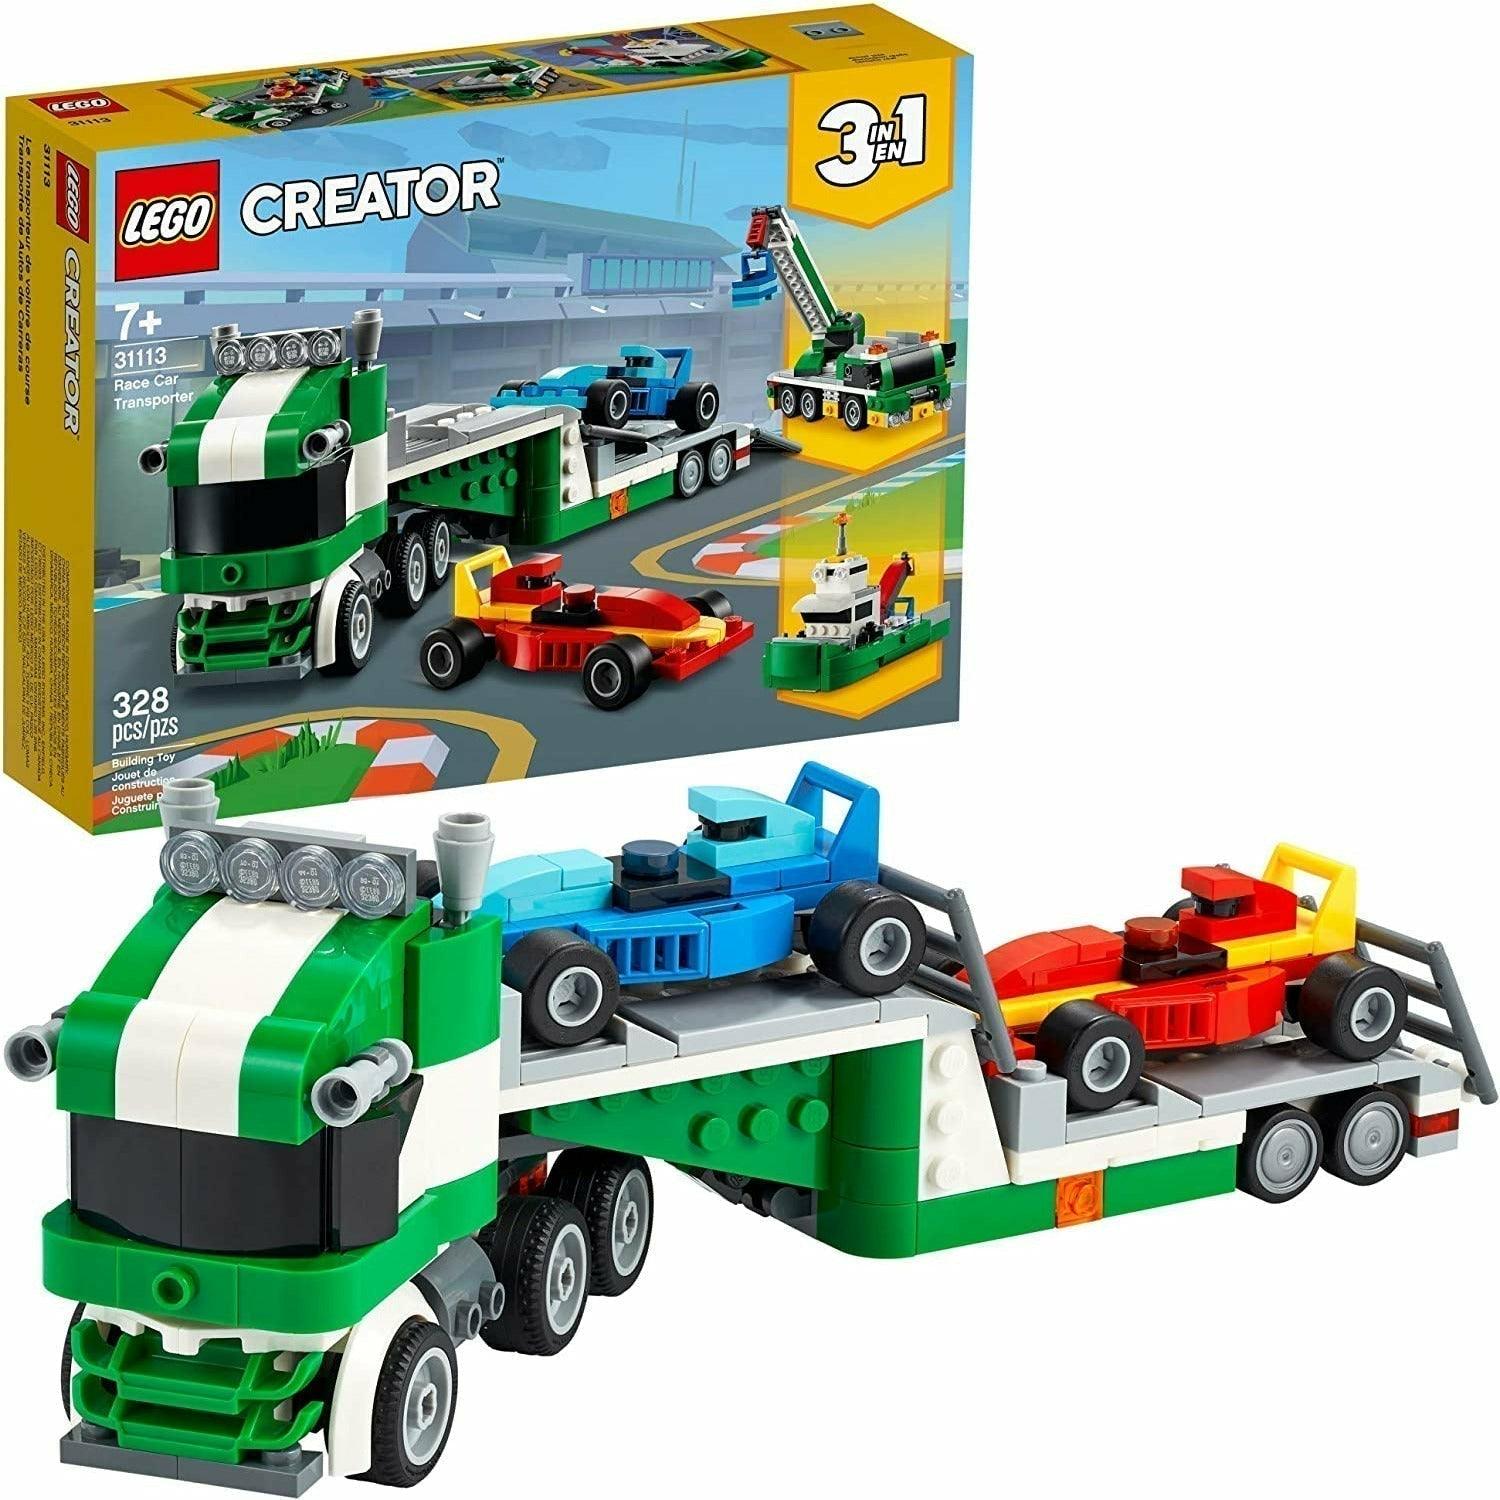 LEGO Creator 3in1 Race Car Transporter 31113 Building Kit; Makes a Great Gift for Kids Who Love Fun Toys and Creative Building (328 Pieces) - BumbleToys - 6+ Years, 8+ Years, Boys, Creator 3In1, LEGO, OXE, Pre-Order